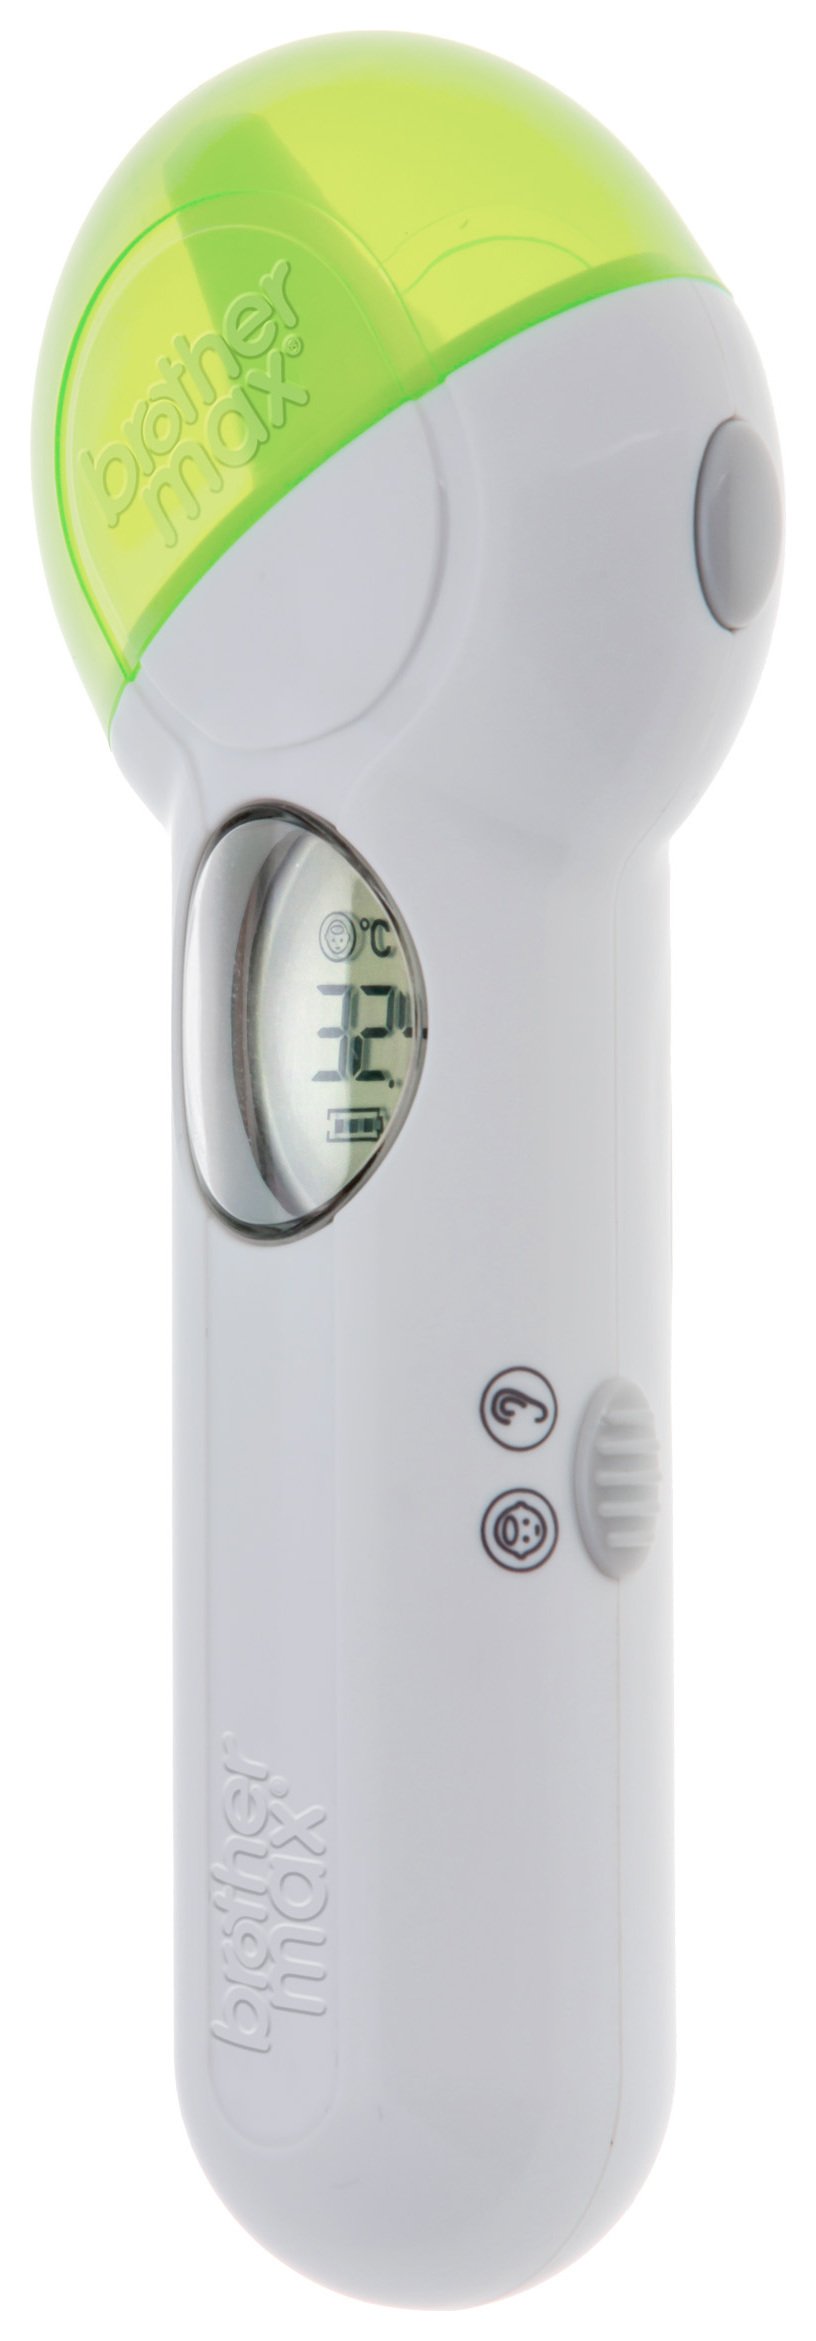 Brother Max 2 in 1 Thermometer. review